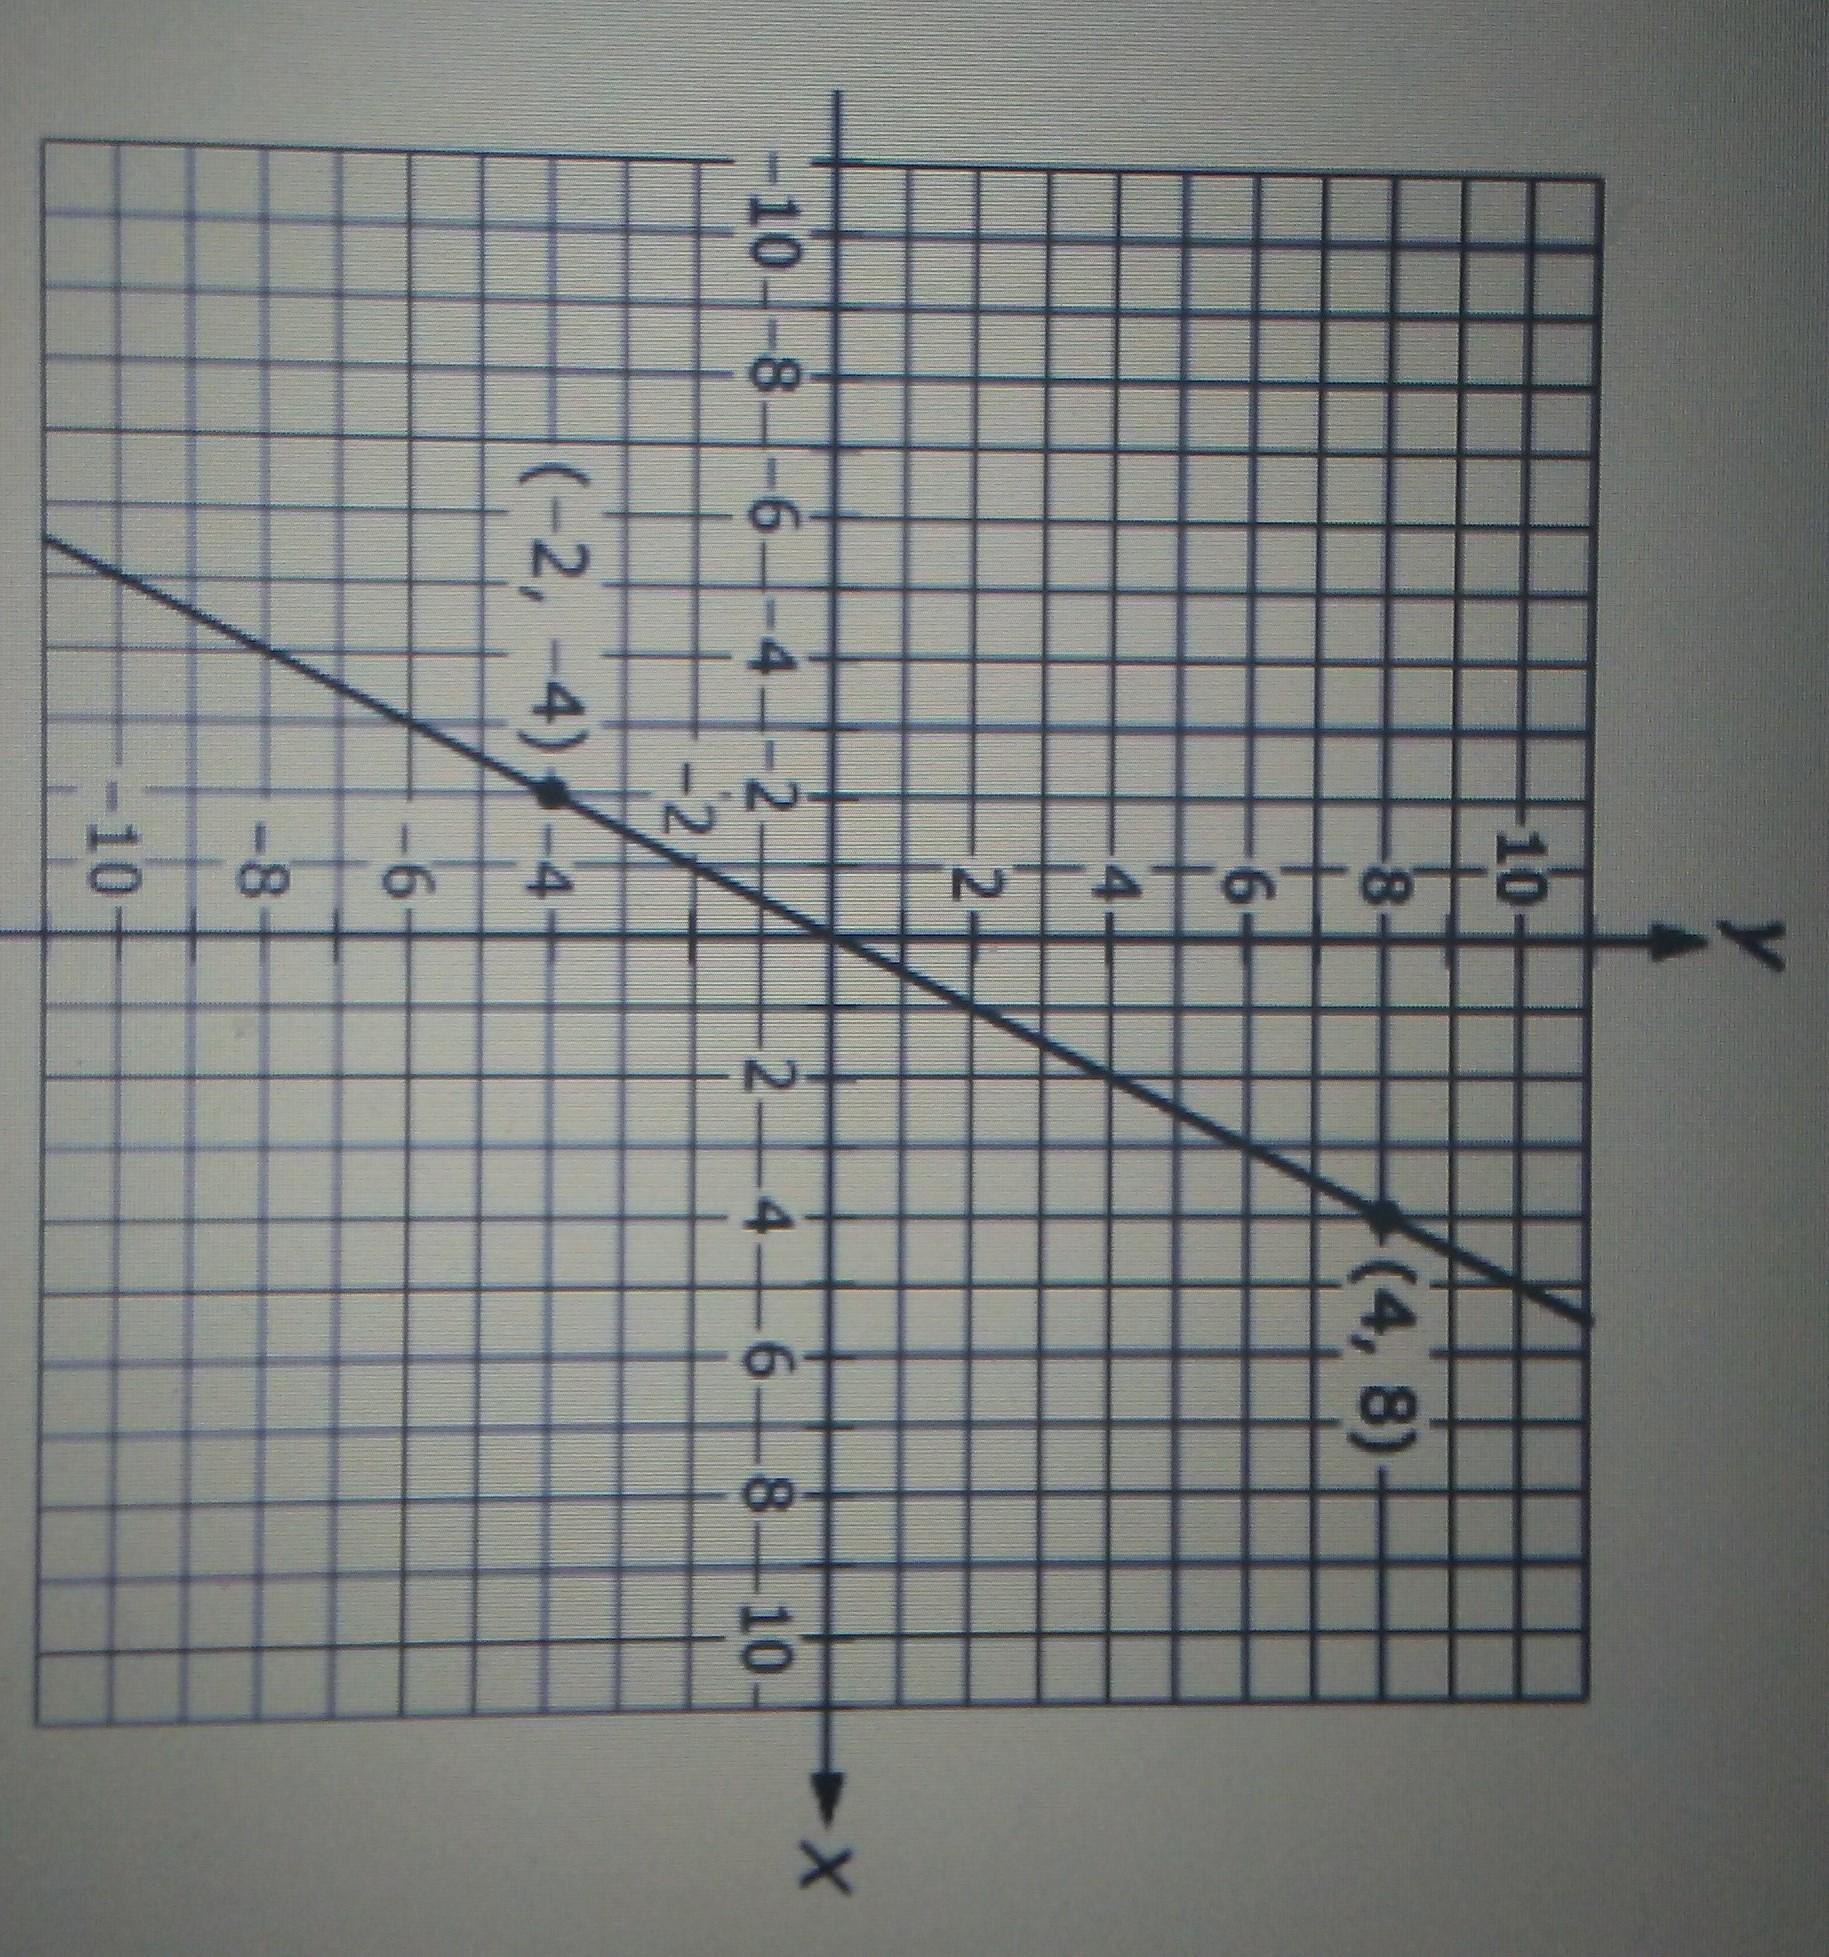 Help Please And Thankyou Write An Equation That Represents The Graph Of The Line Shown In The Coordinate